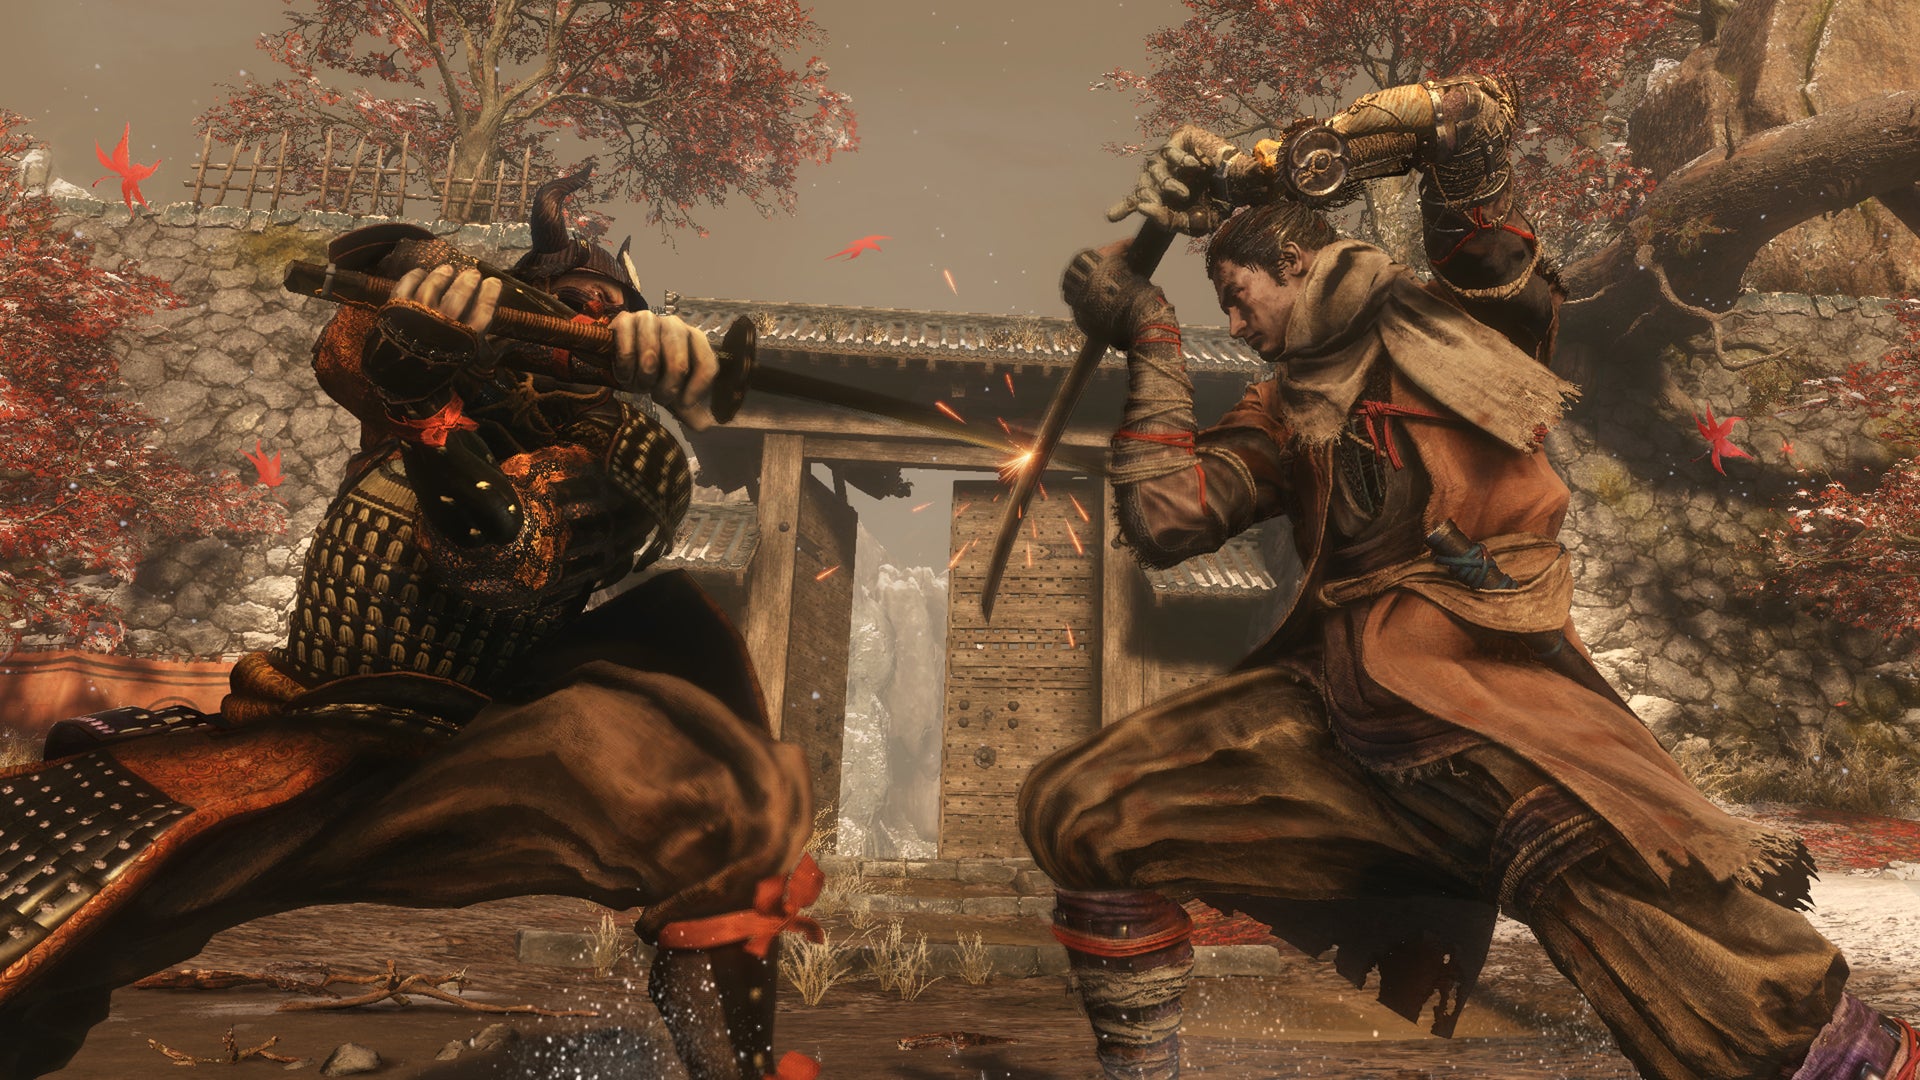 Image for Sekiro: Shadows Die Twice has sold 3.8 million copies since launch